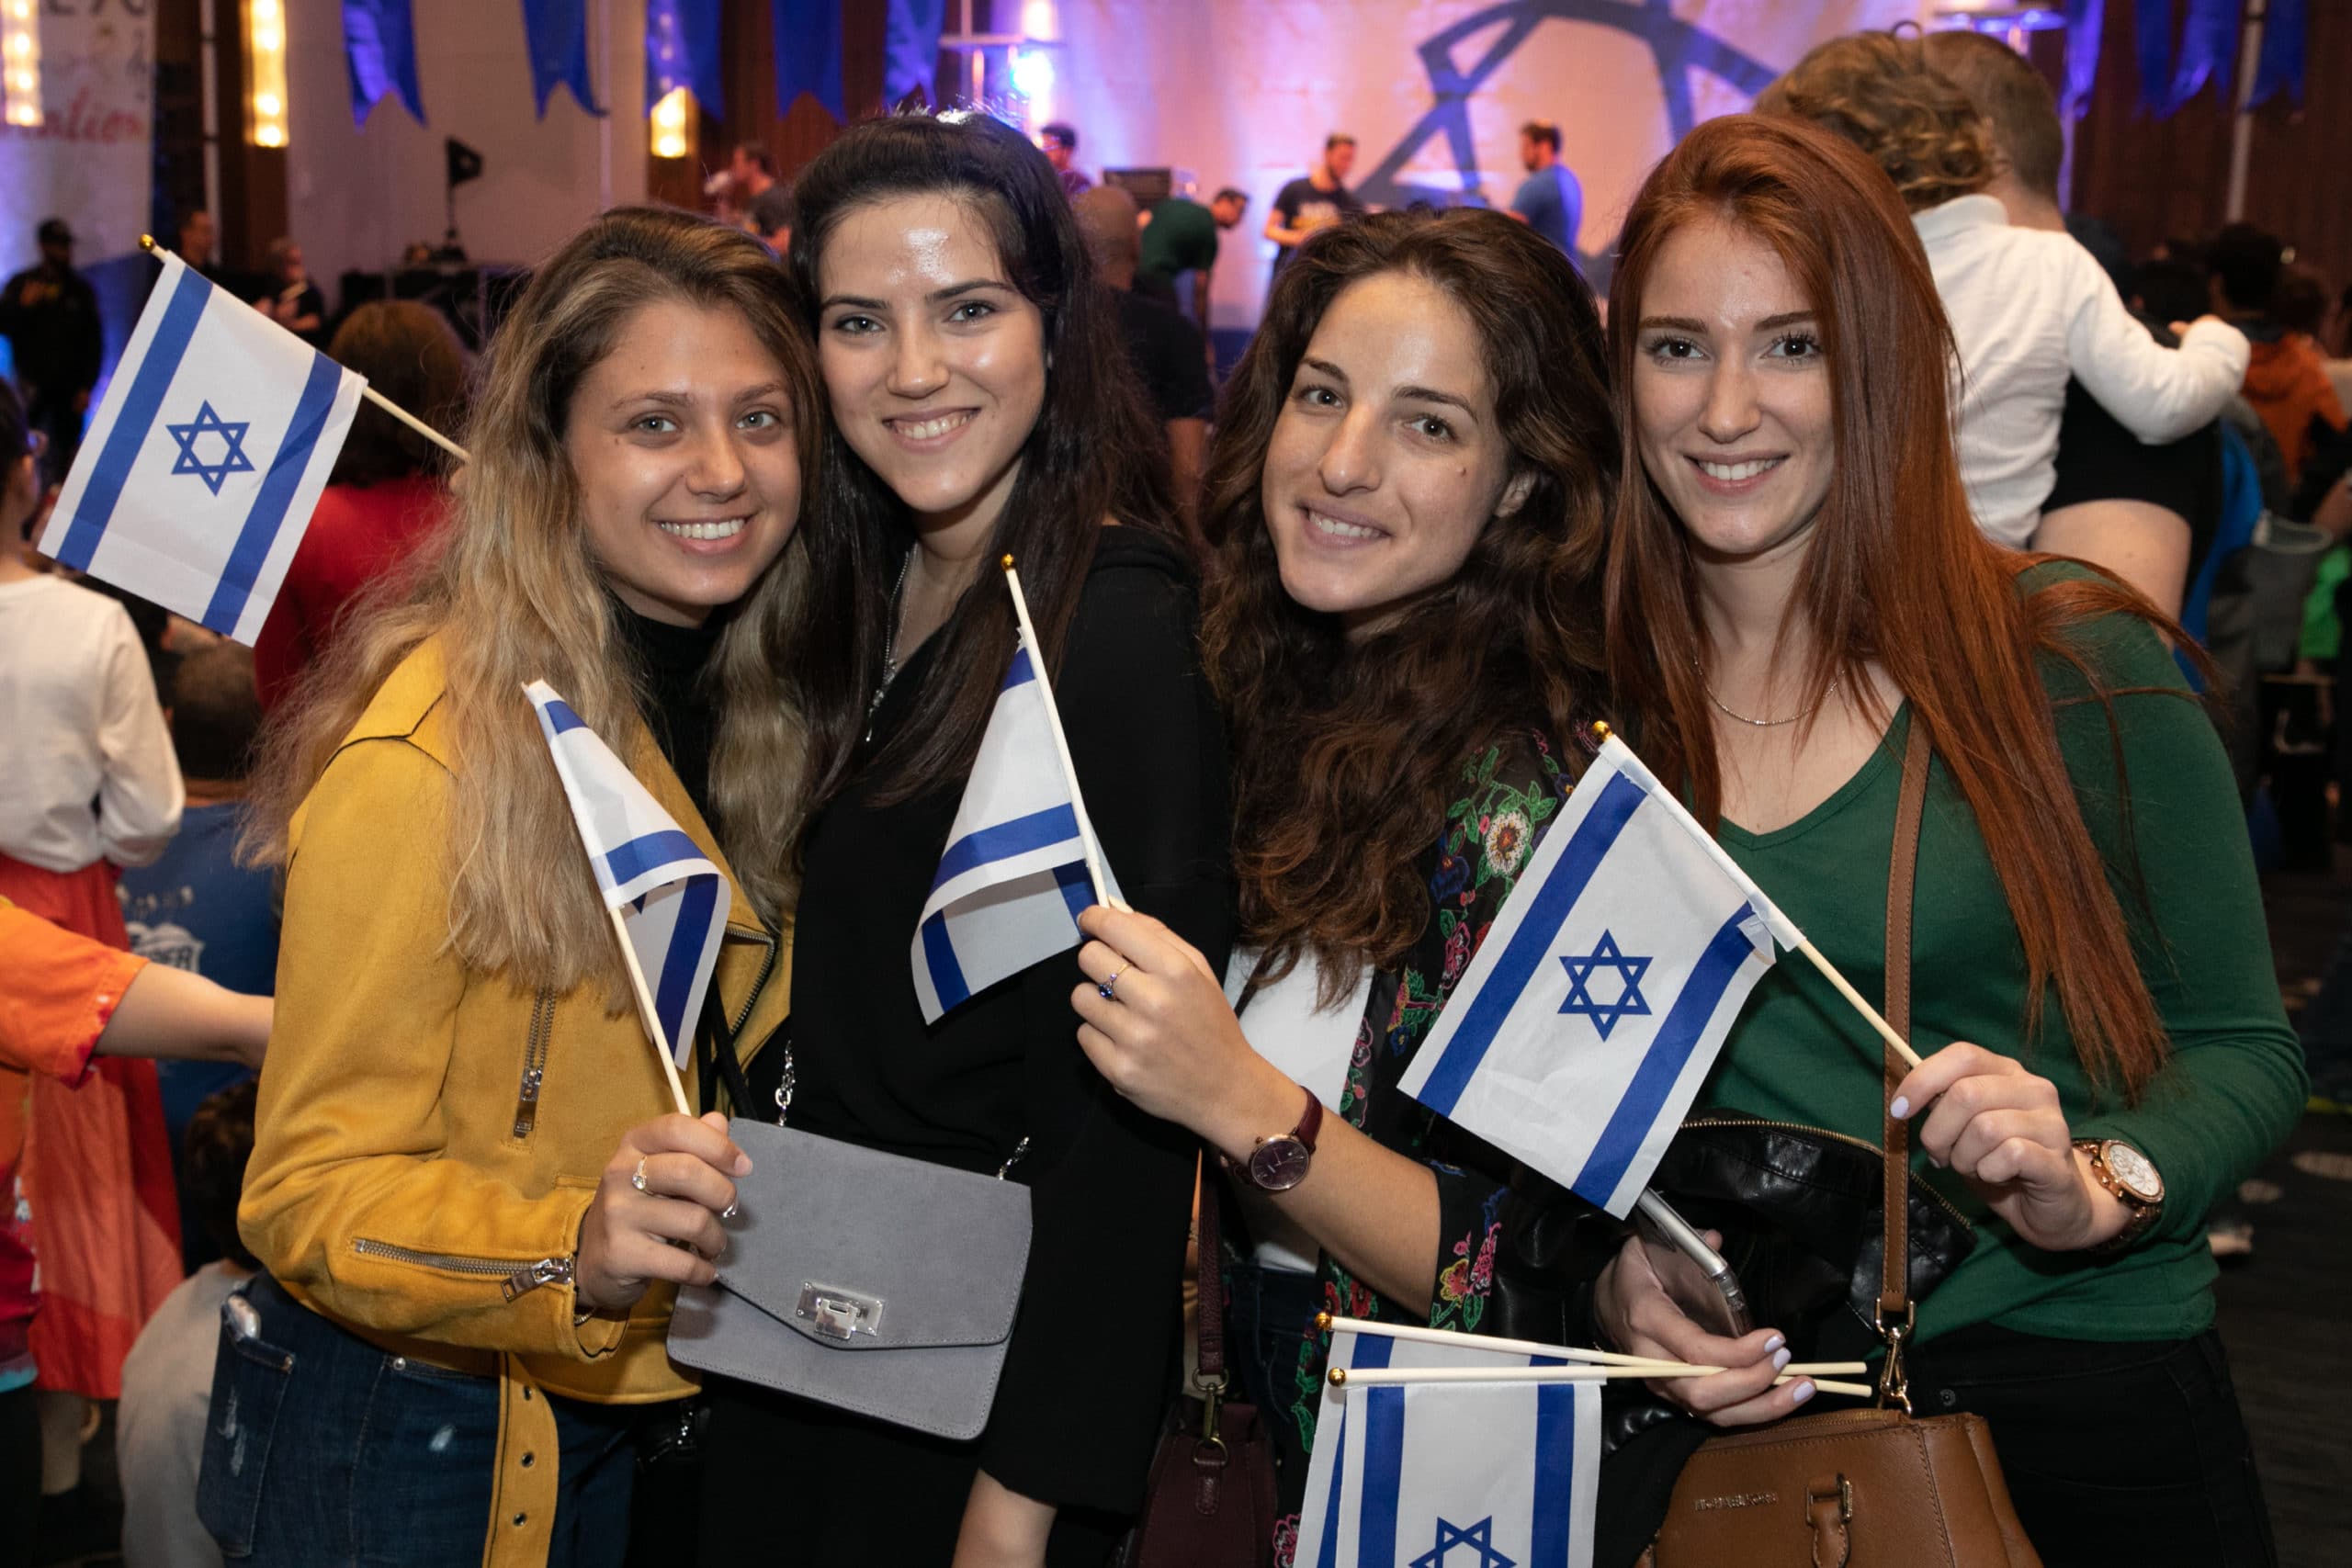 4 young women with Israeli flags